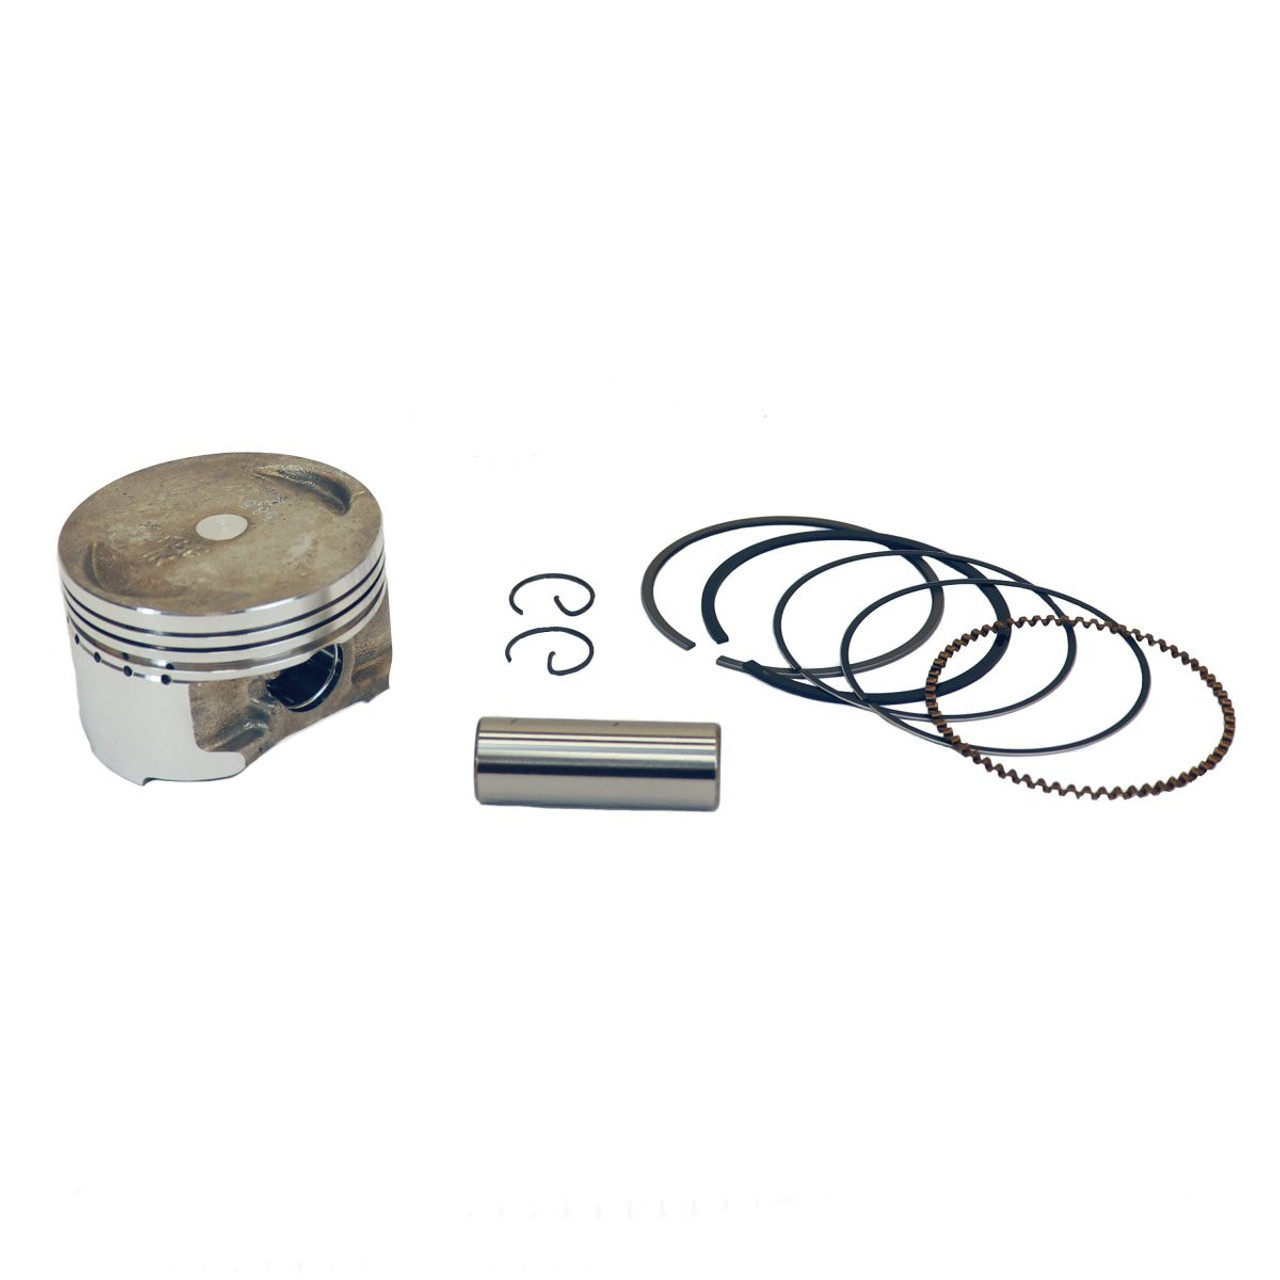 SSP-G (2V) *58.5mm BORE* 155cc FLAT TOP PISTON & RINGS KIT FOR GY6 